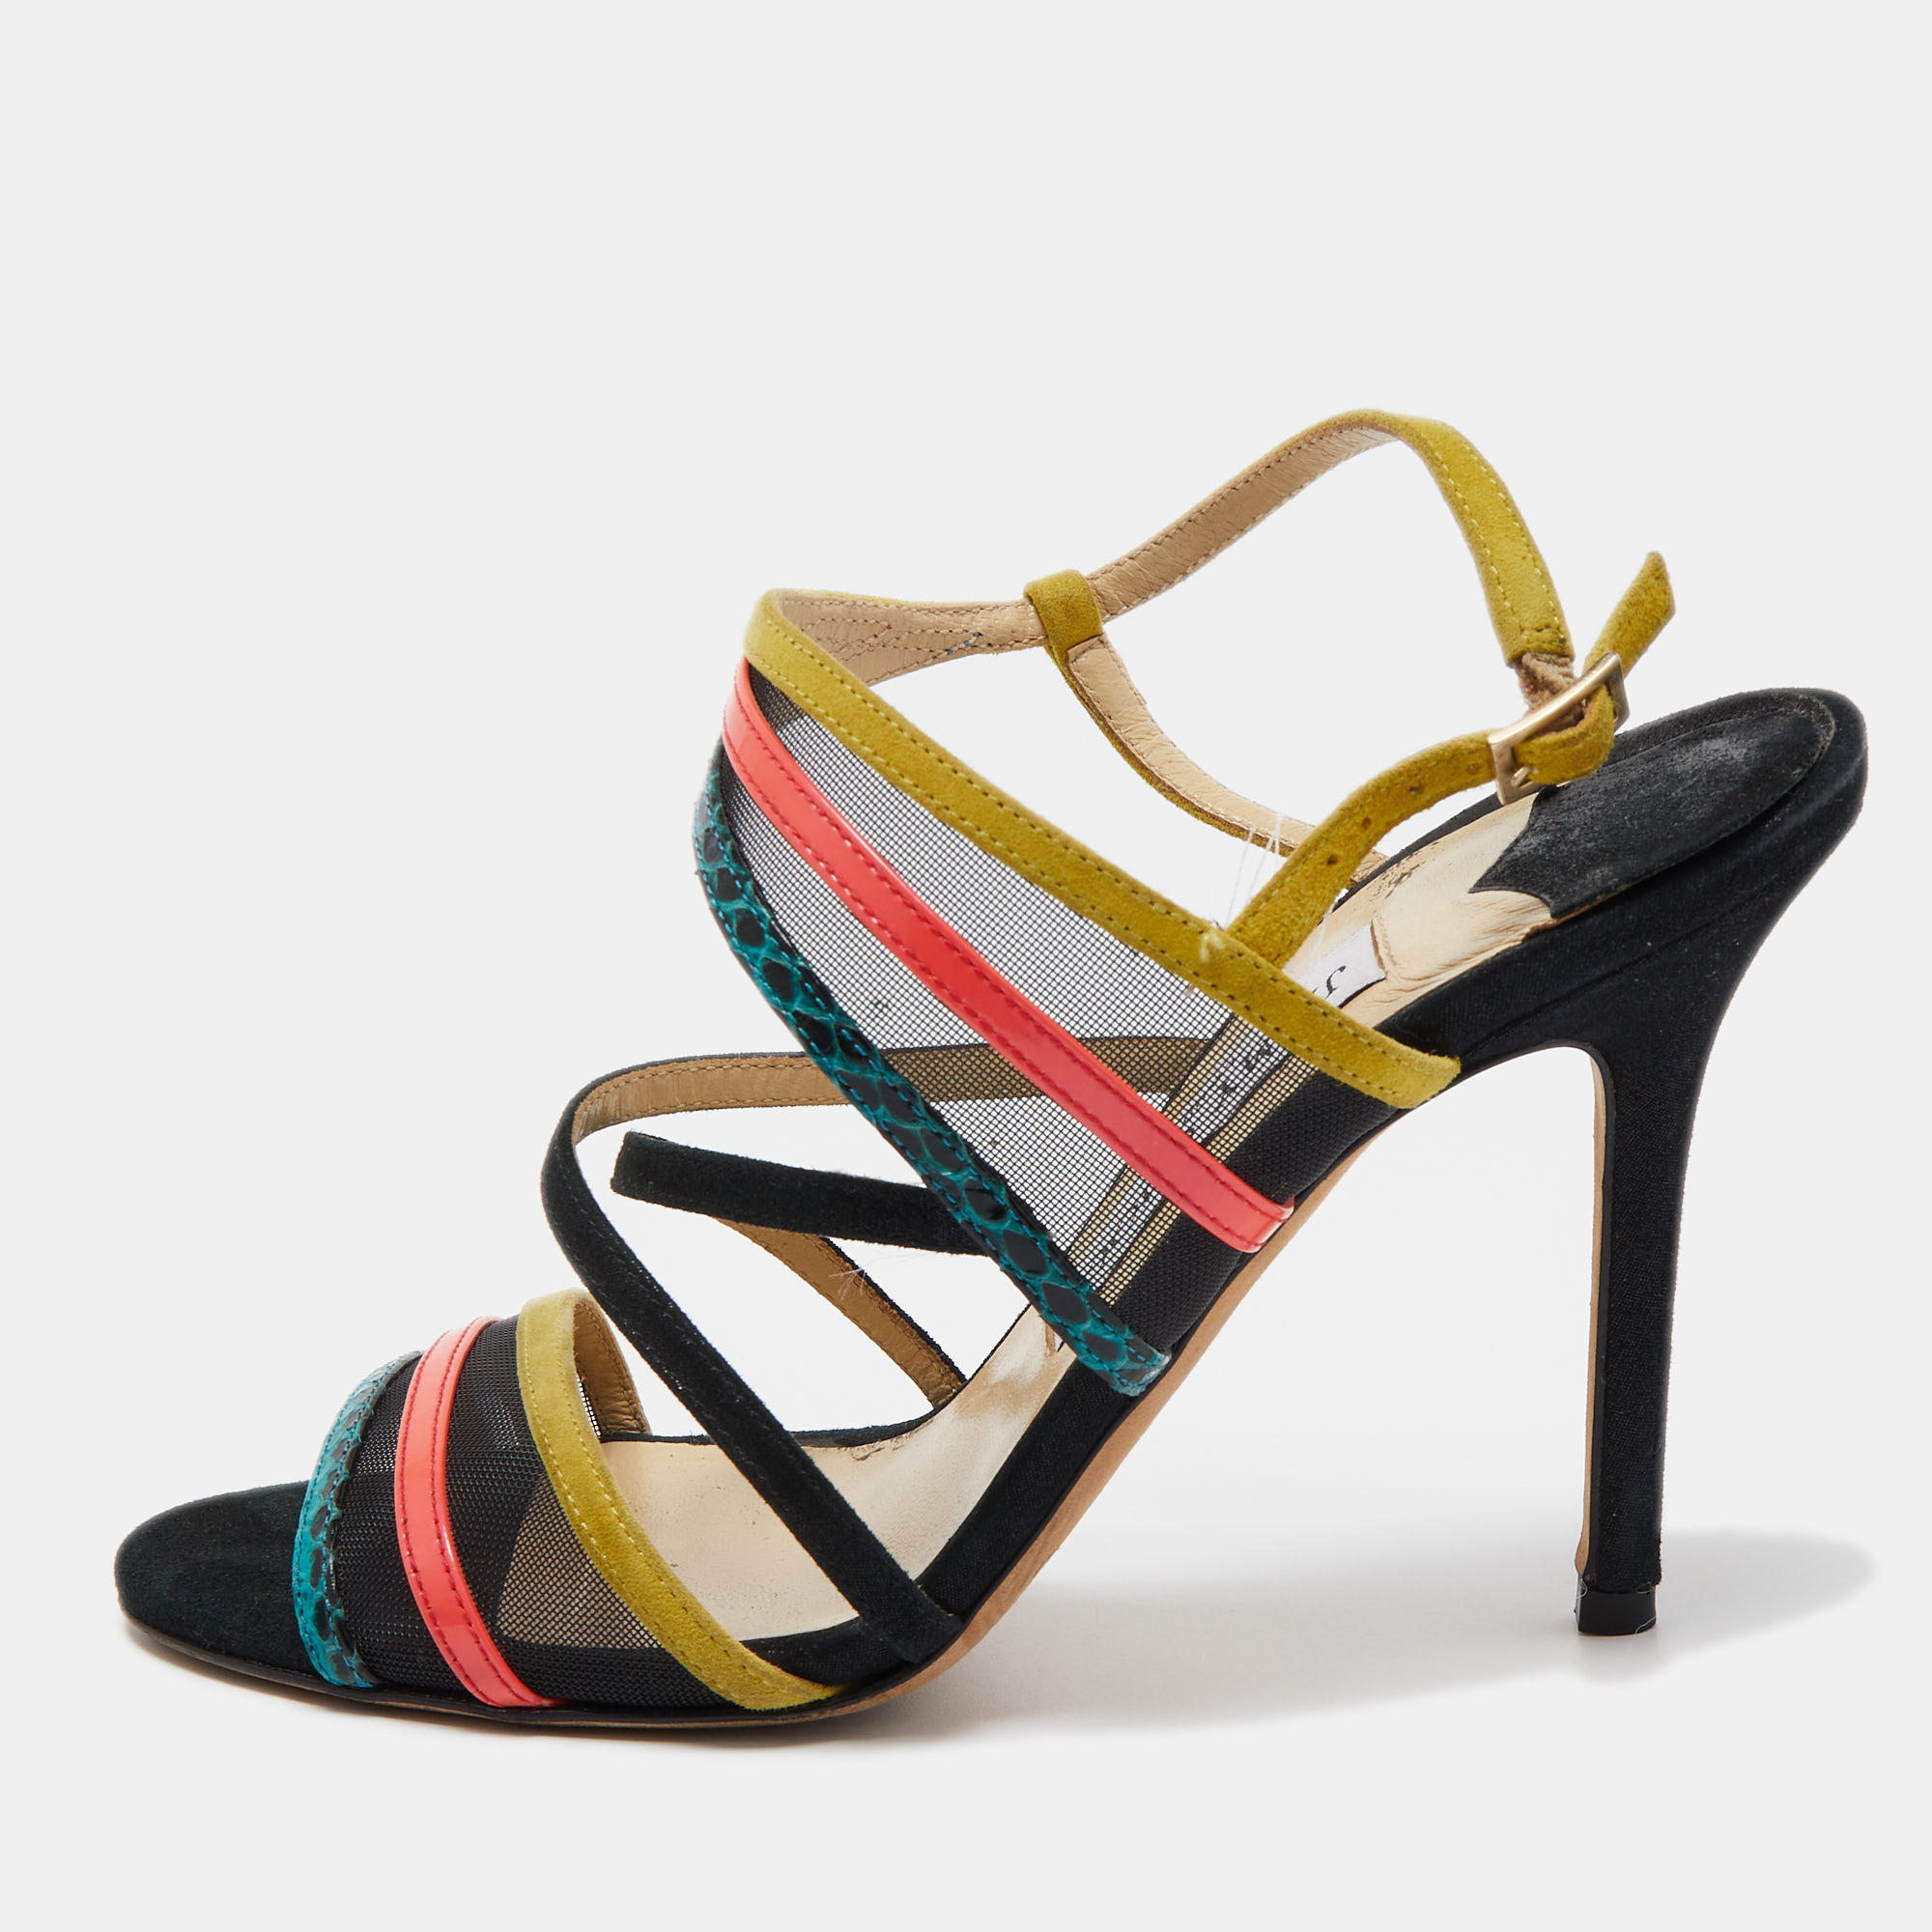 Jimmy Choo Multicolor Suede And Mesh Ankle Strap Sandals Size 36.5